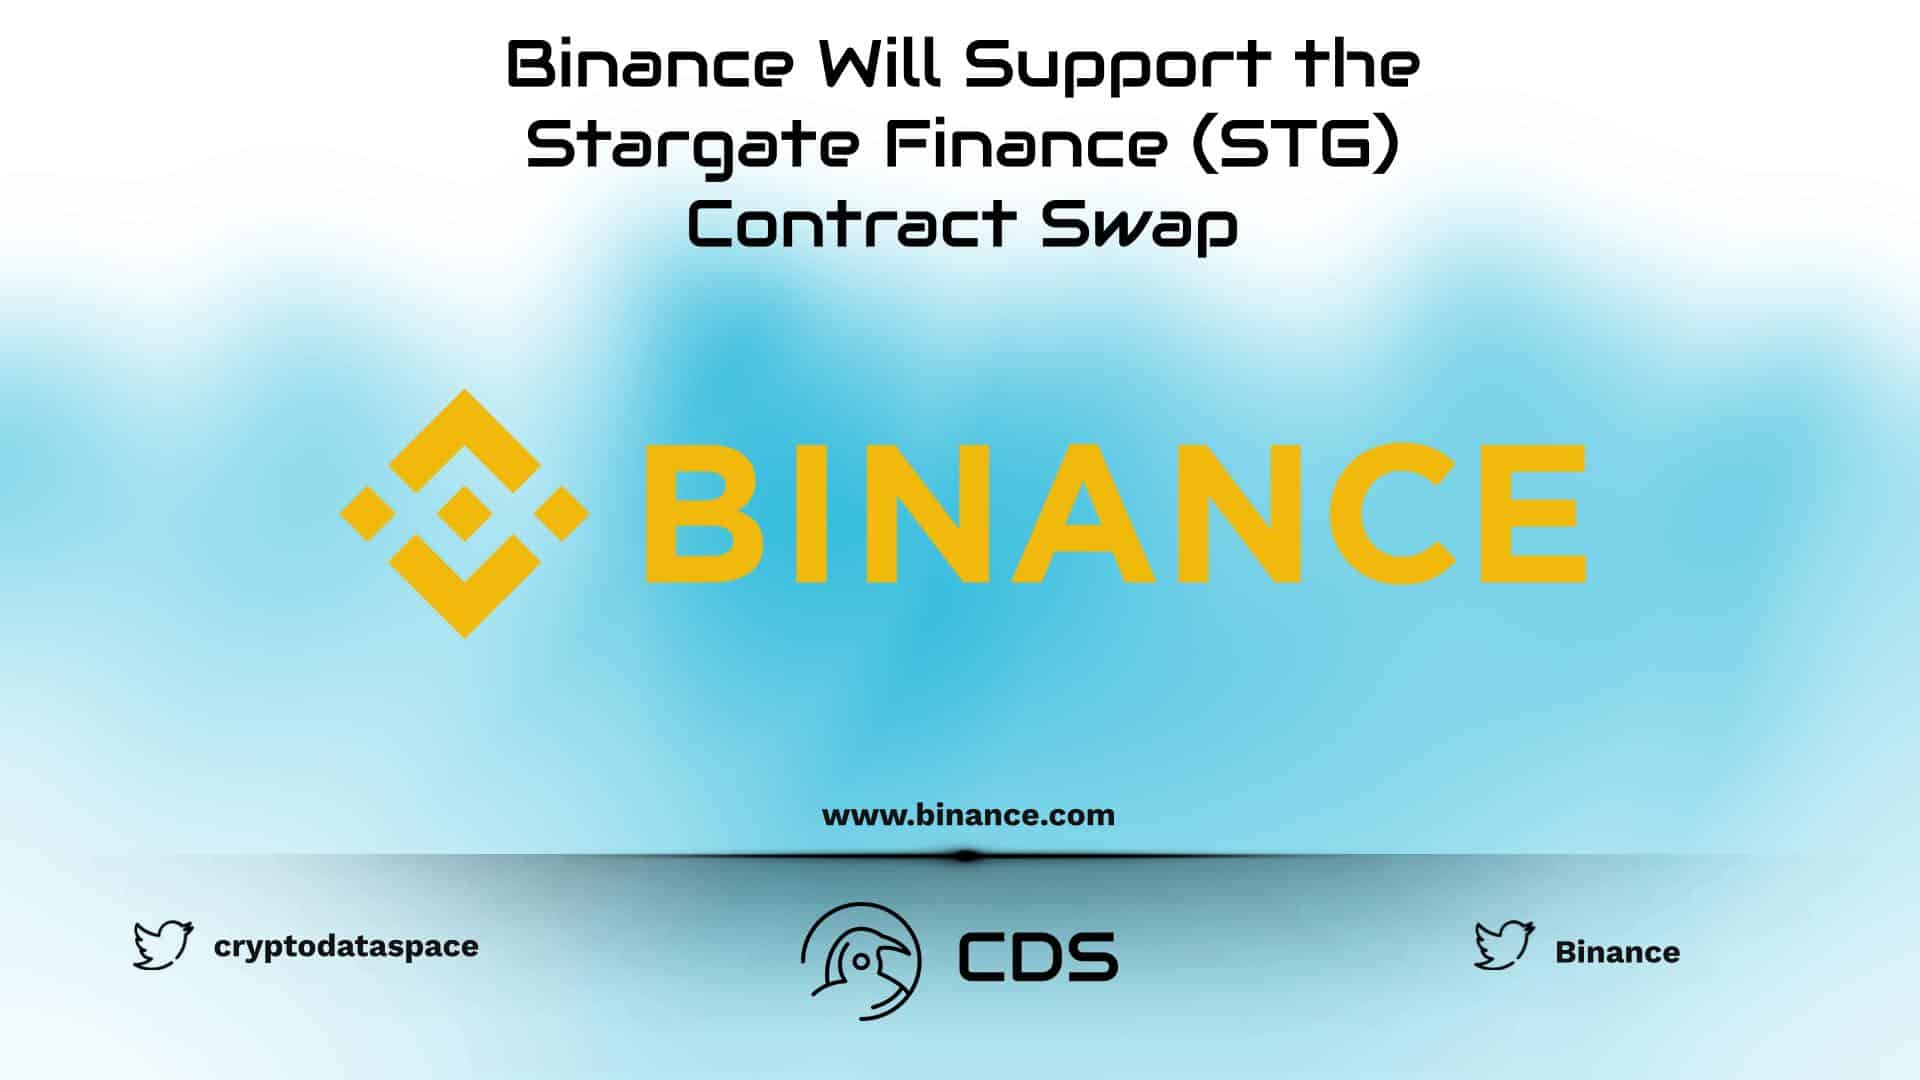 Binance Will Support the Stargate Finance (STG) Contract Swap